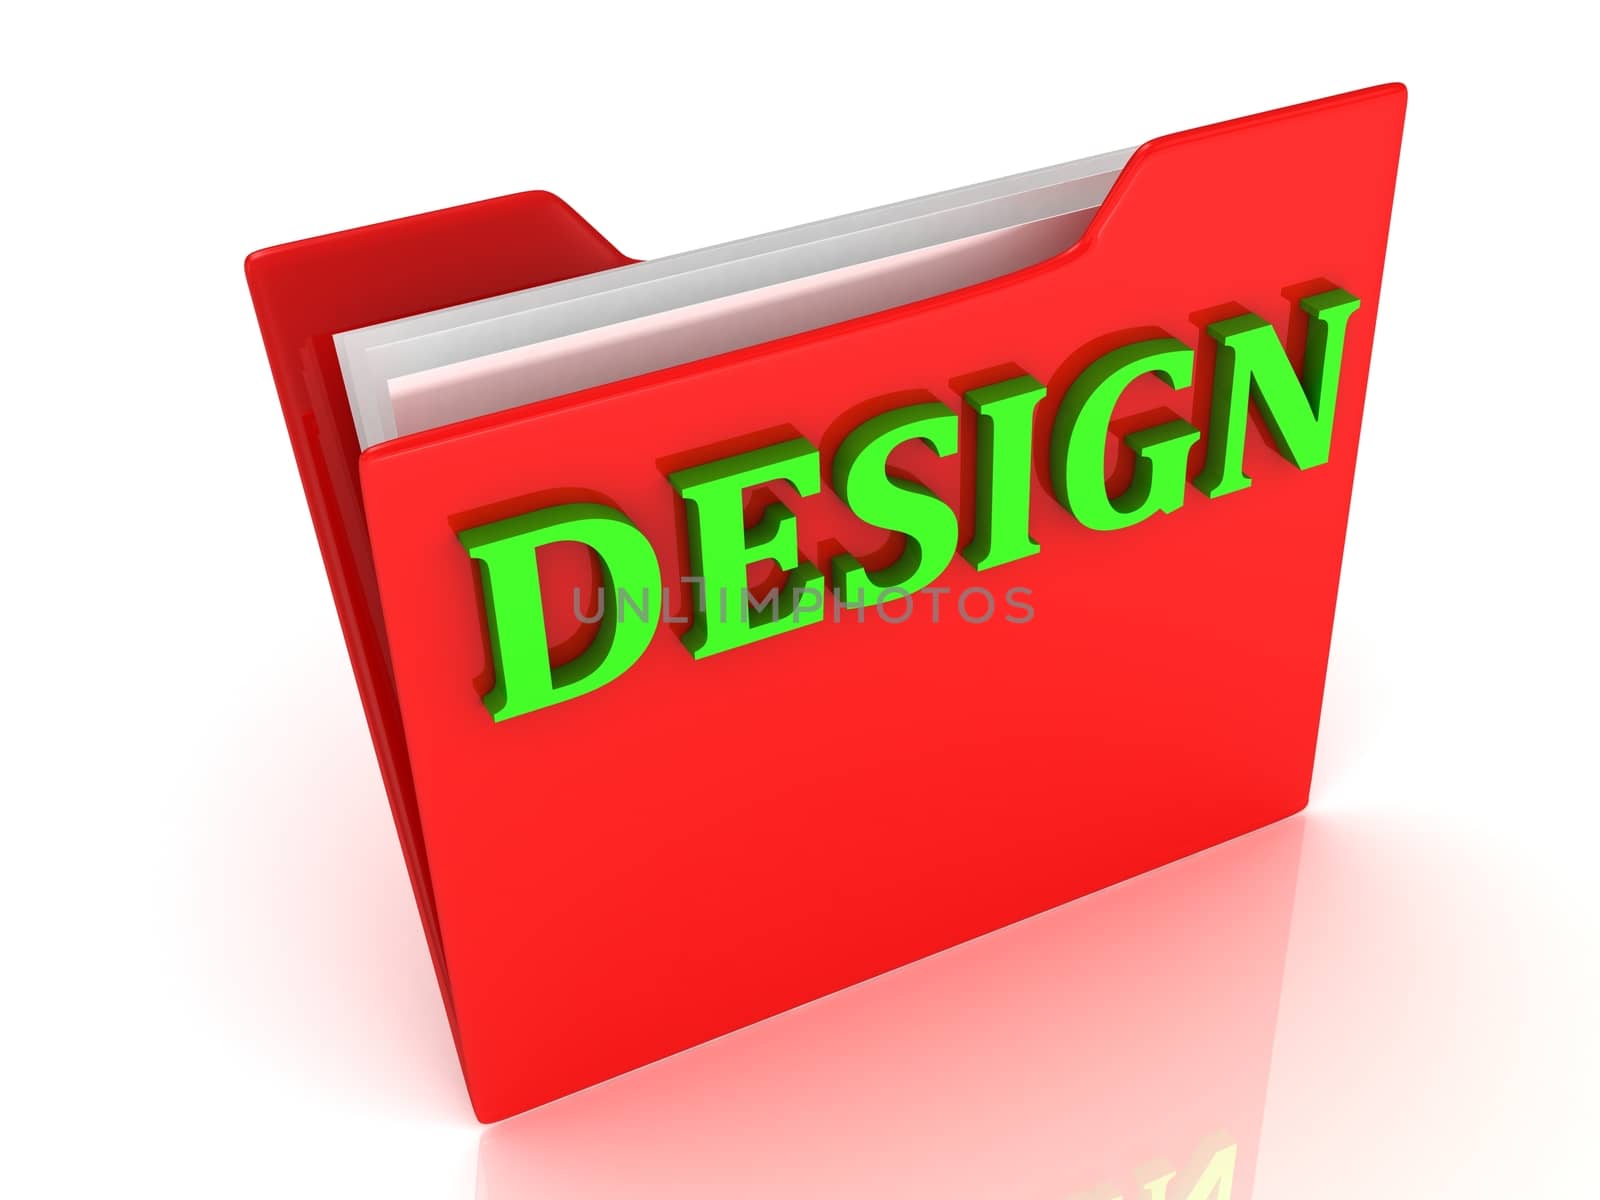 DESIGN bright green letters on a red folder on a white background